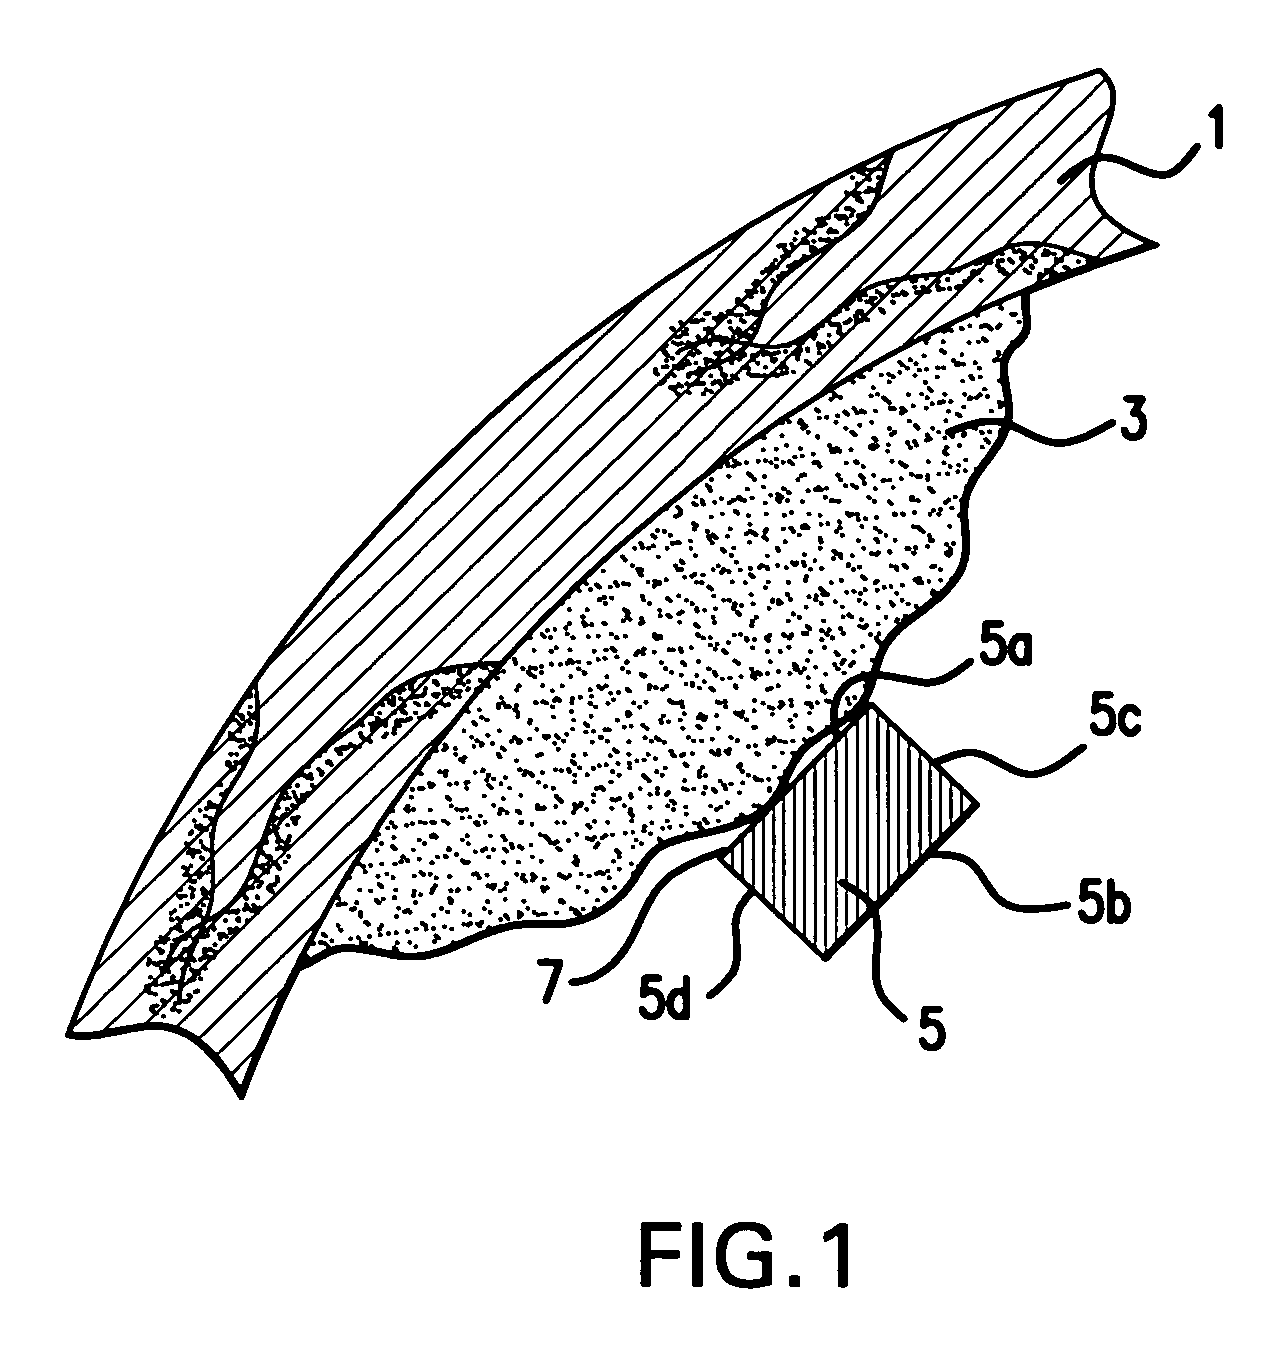 Stent for delivering a therapeutic agent having increased body tissue contact surface